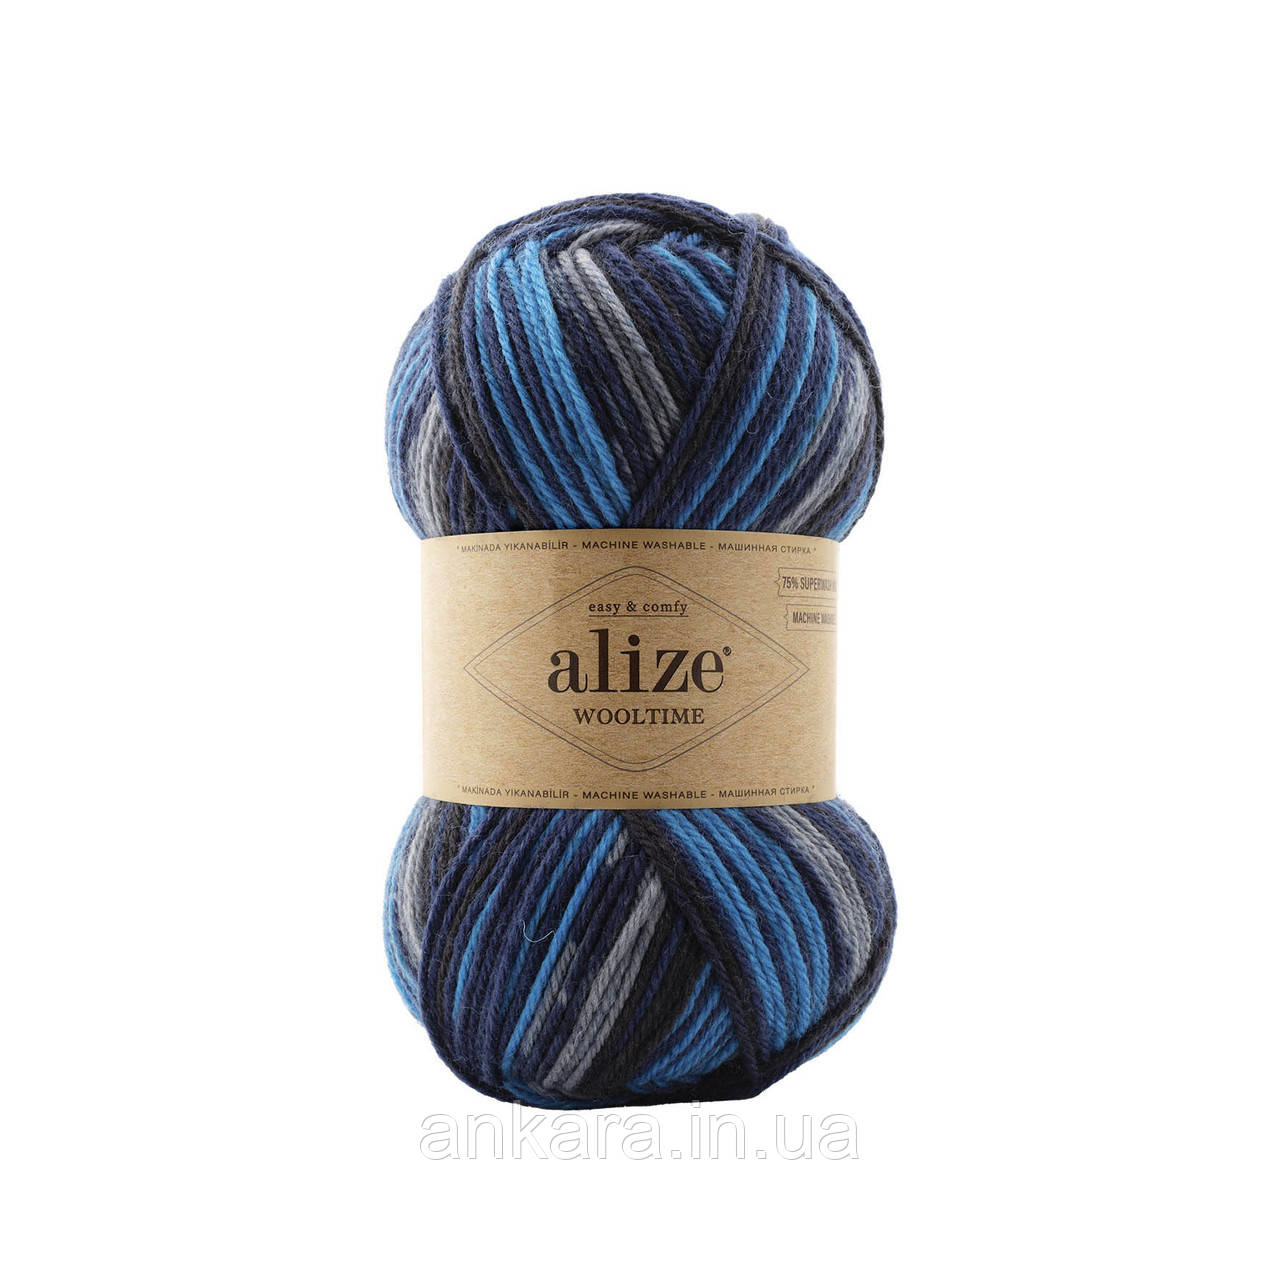 Alize Wooltime 11011